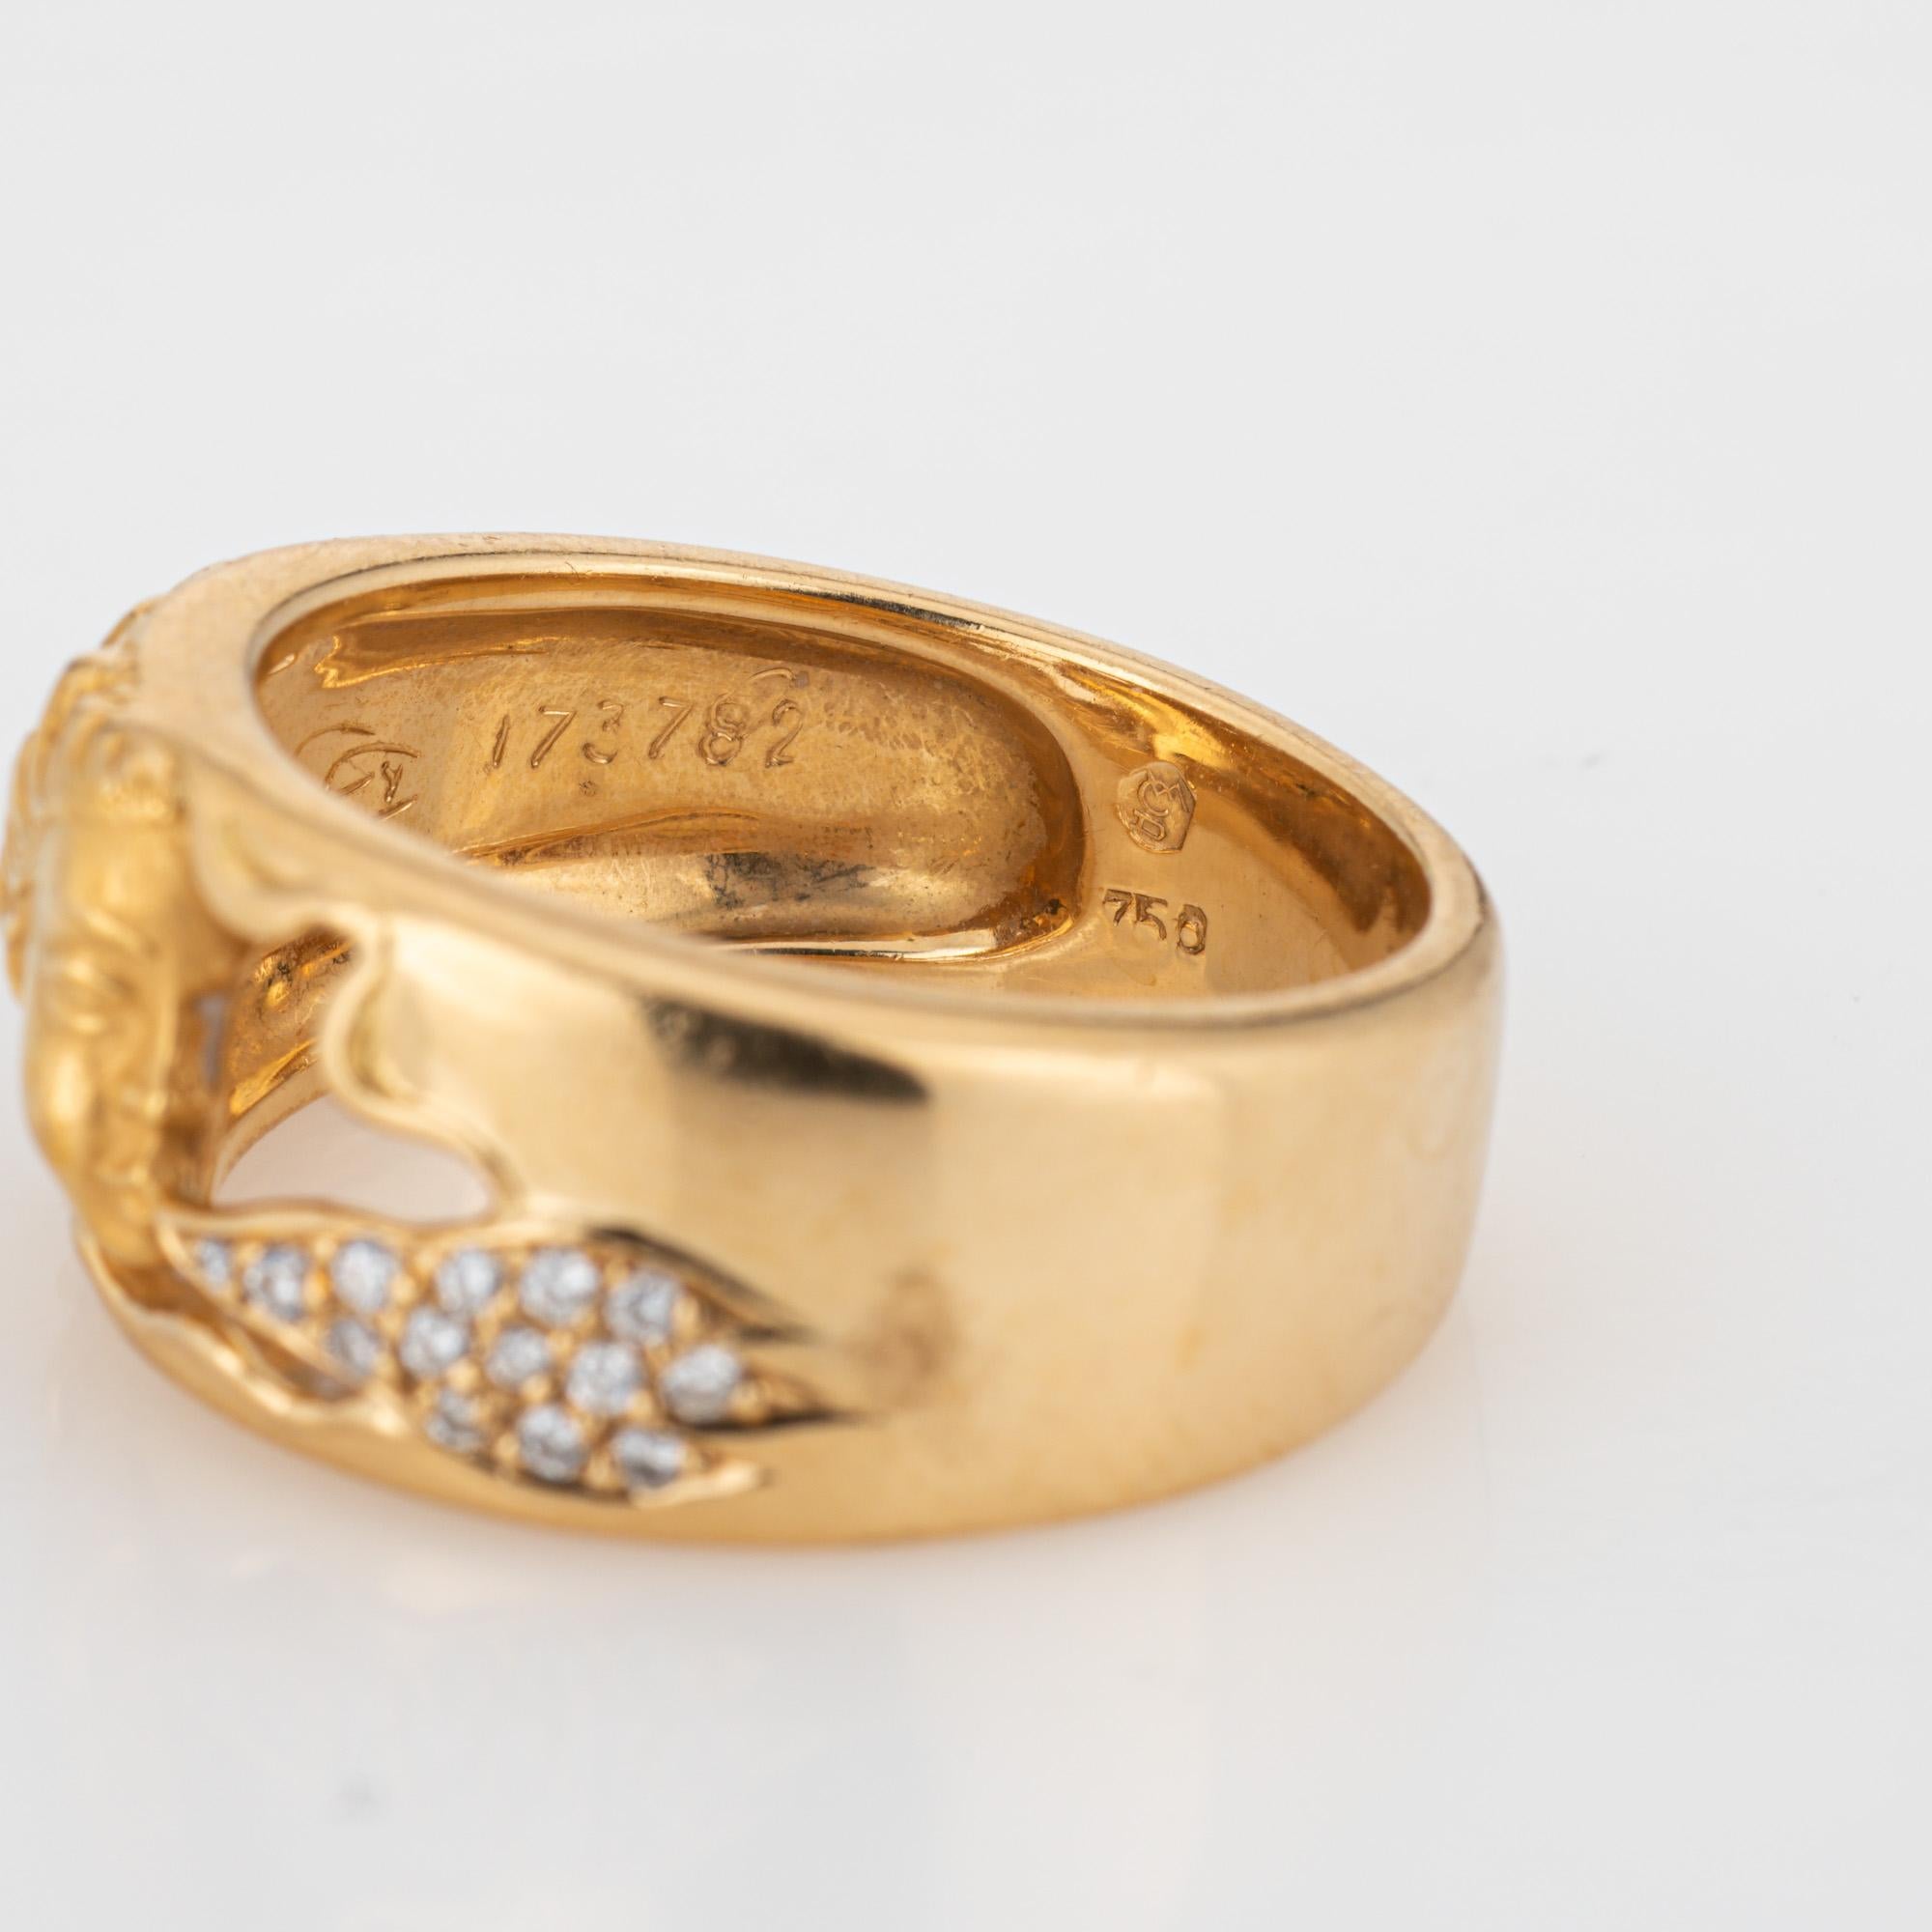 Carrera y Carrera Diamond Ring 18k Yellow Gold Sz 6.5 Nymph Blowing Wind c2000  For Sale 1